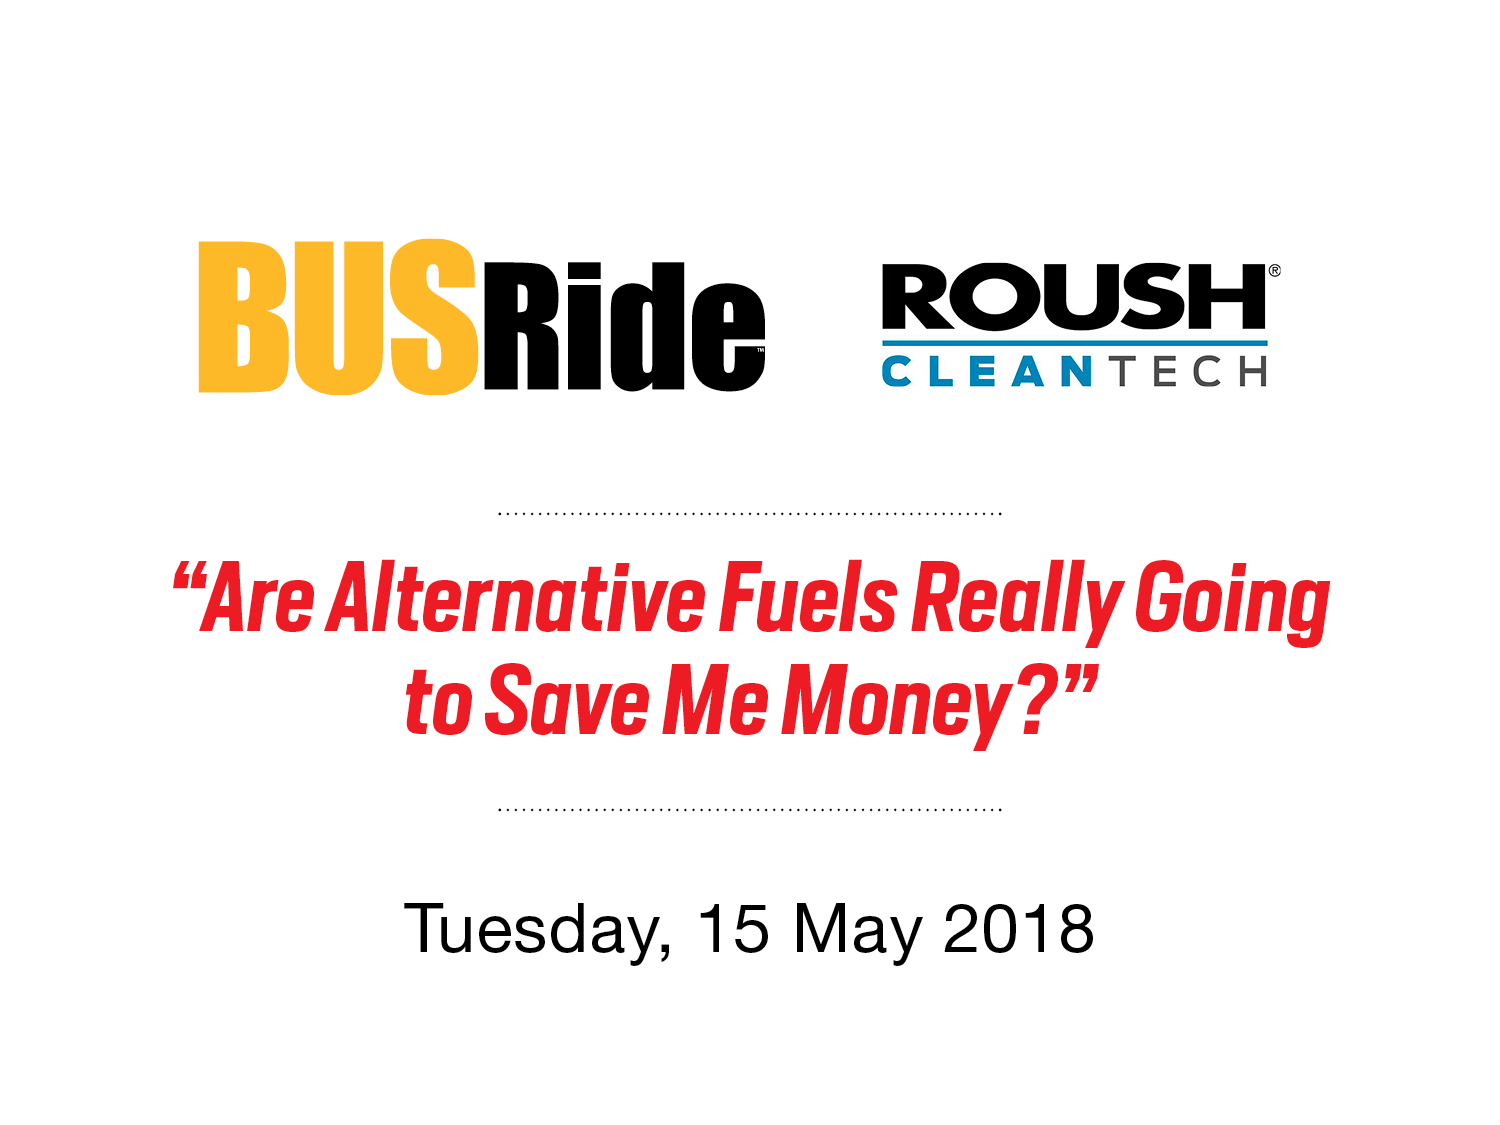 Are Alternative Fuels Really Going to Save Me Money?